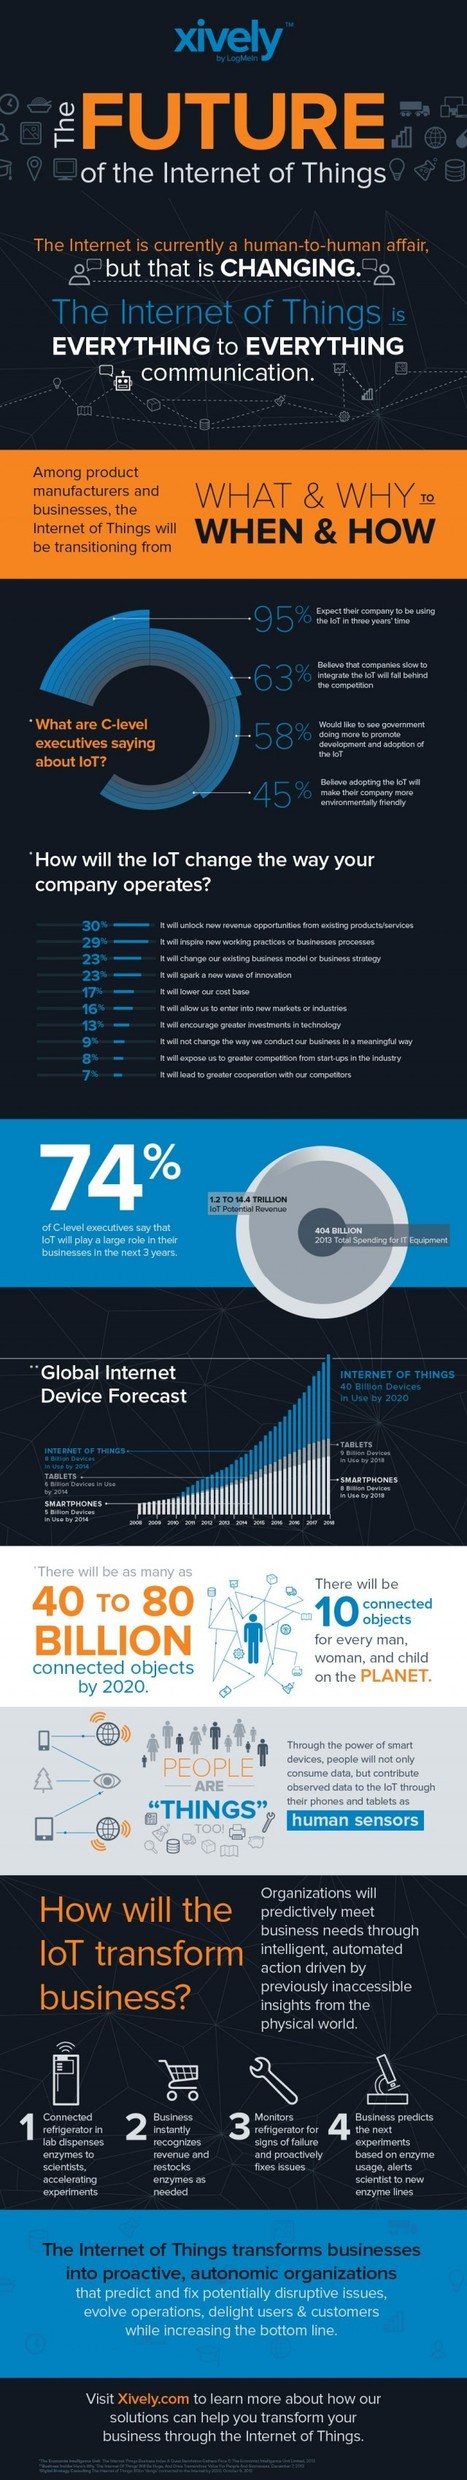 The Future of the Internet of Things [infographic] | SocialMedia_me | Scoop.it